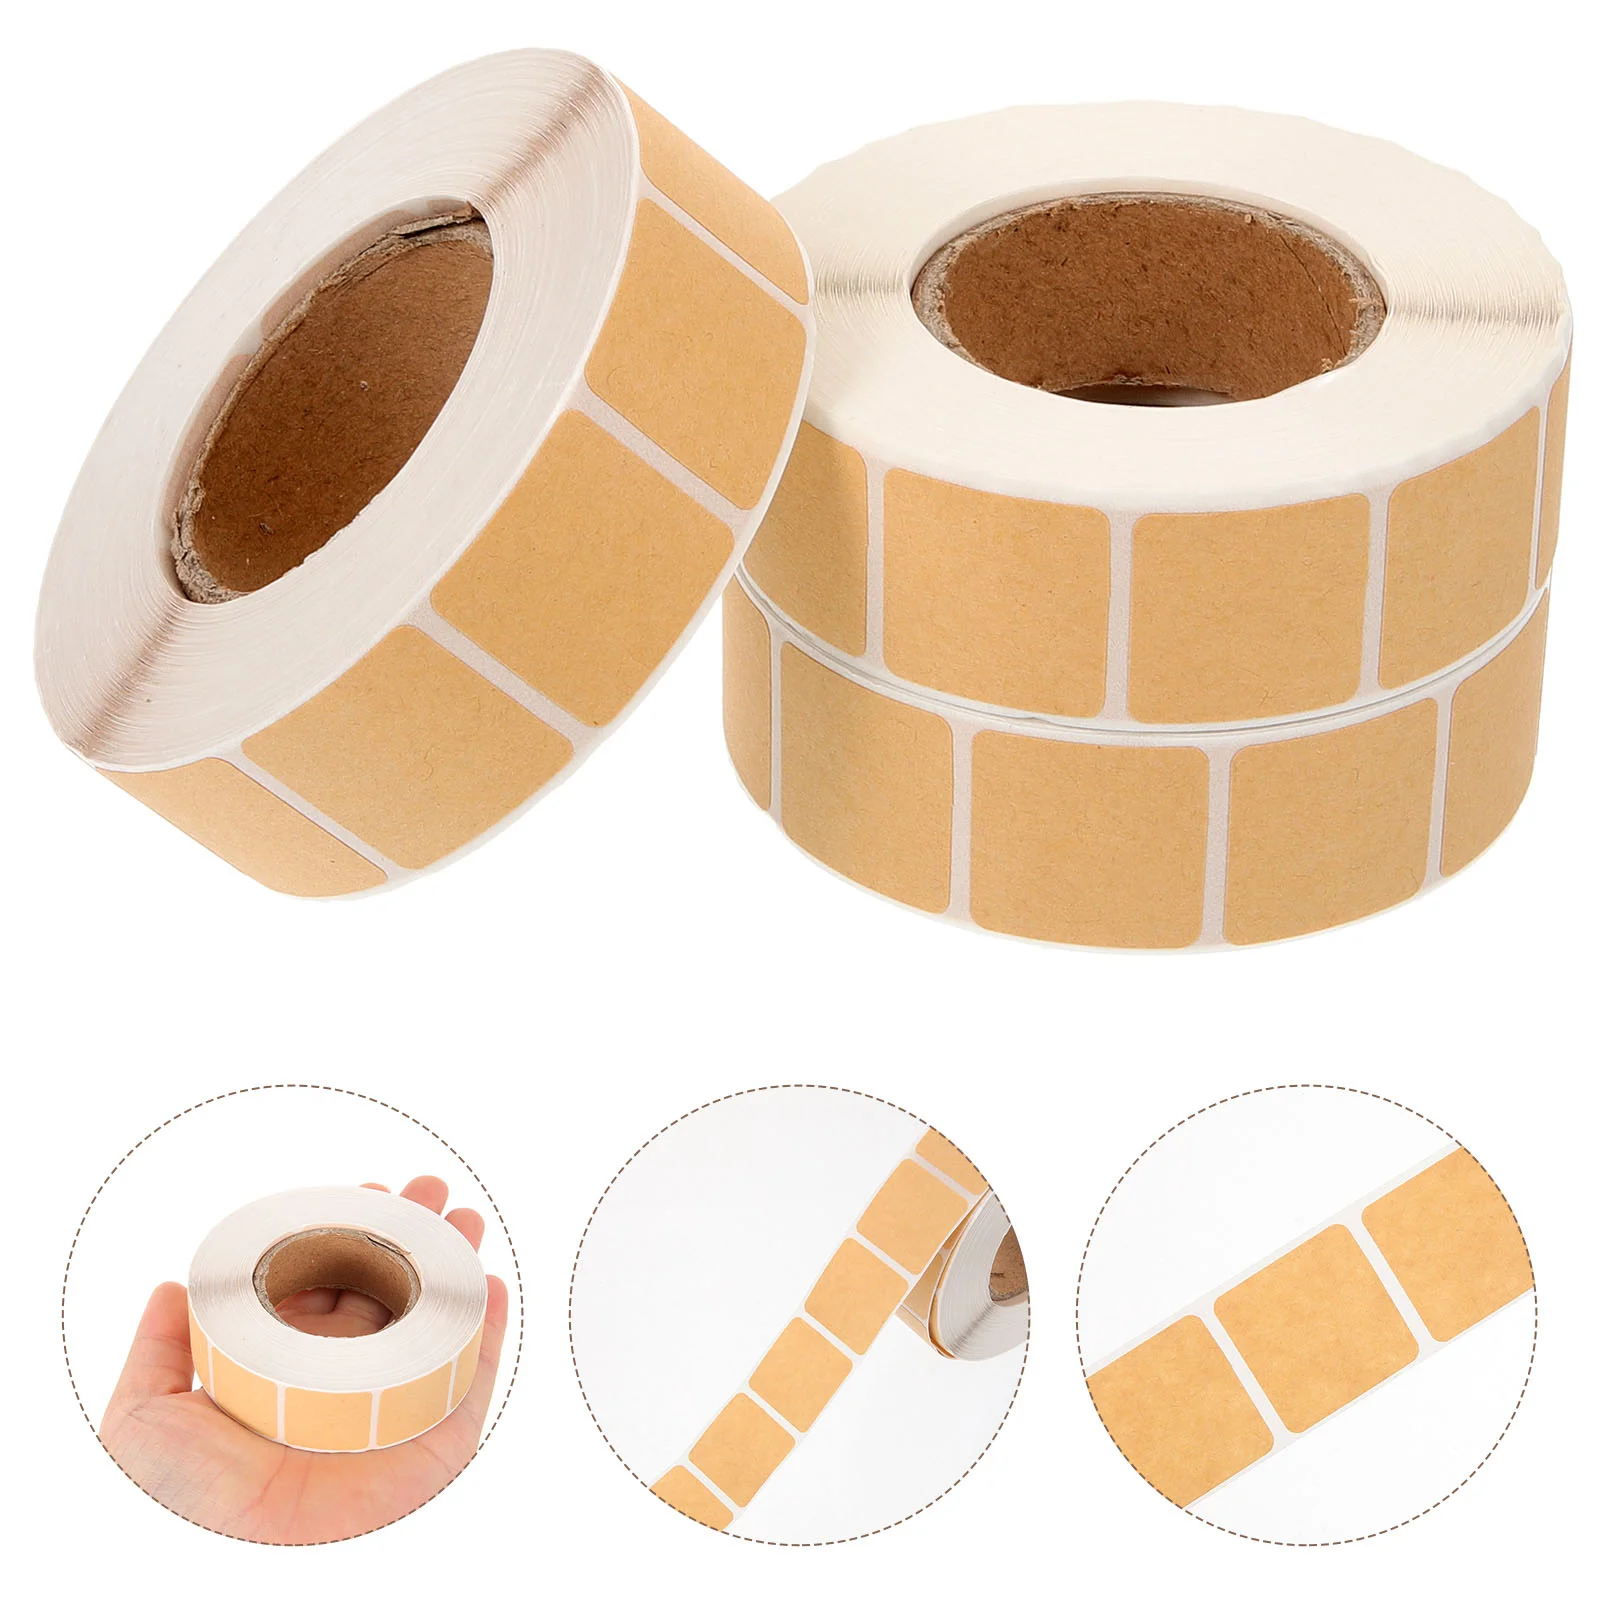 

3 Rolls Target Board Repair Stickers Sports Labels Nail Repairing Decal Practical Pasters Square Applique Self-adhesive